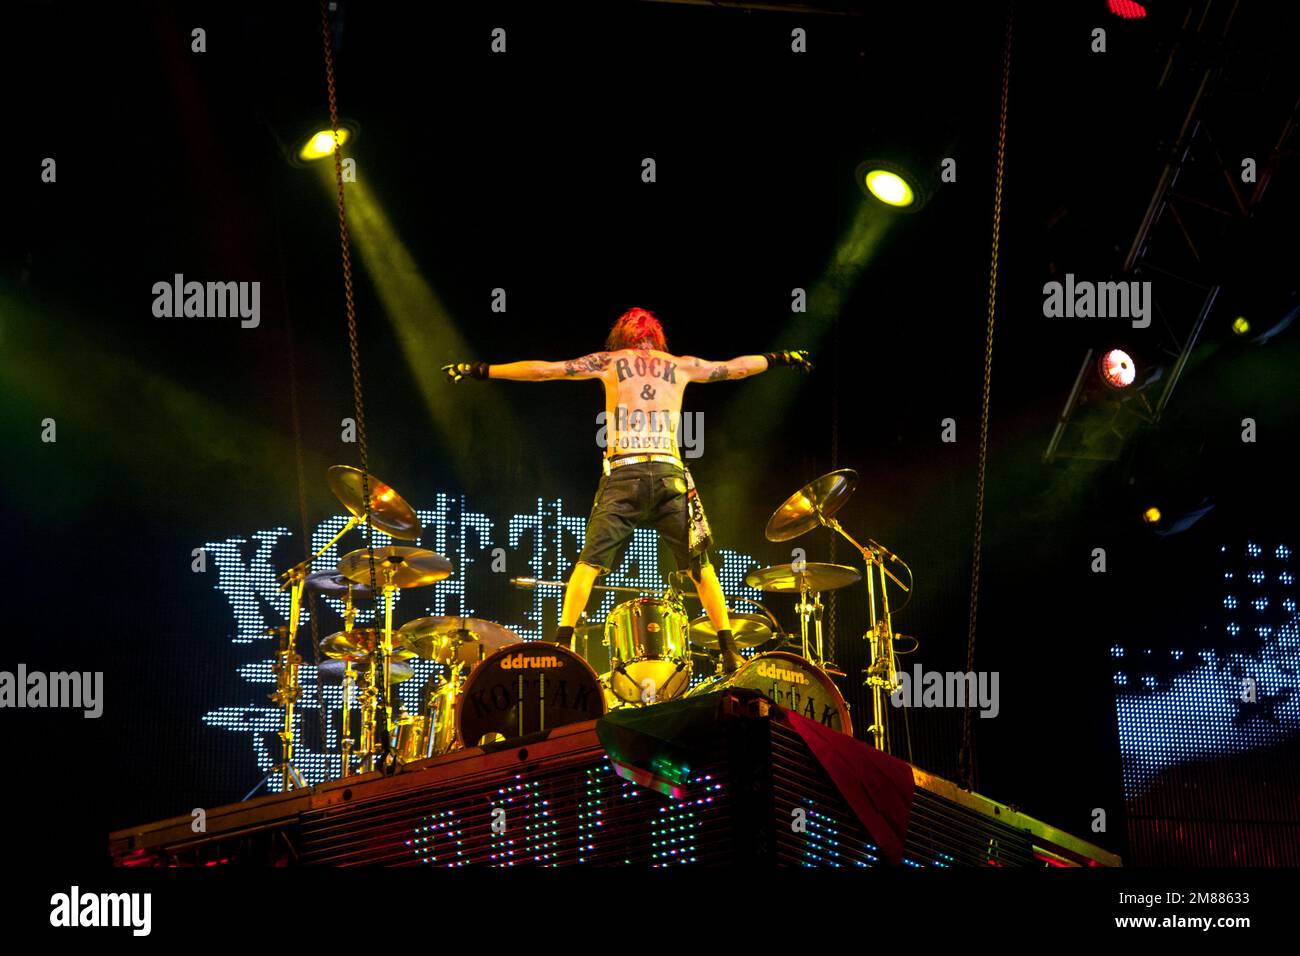 Live-photo of James Kottak who is the drummer of the German hard rock band Scorpions. Lisbon, 2011 Stock Photo